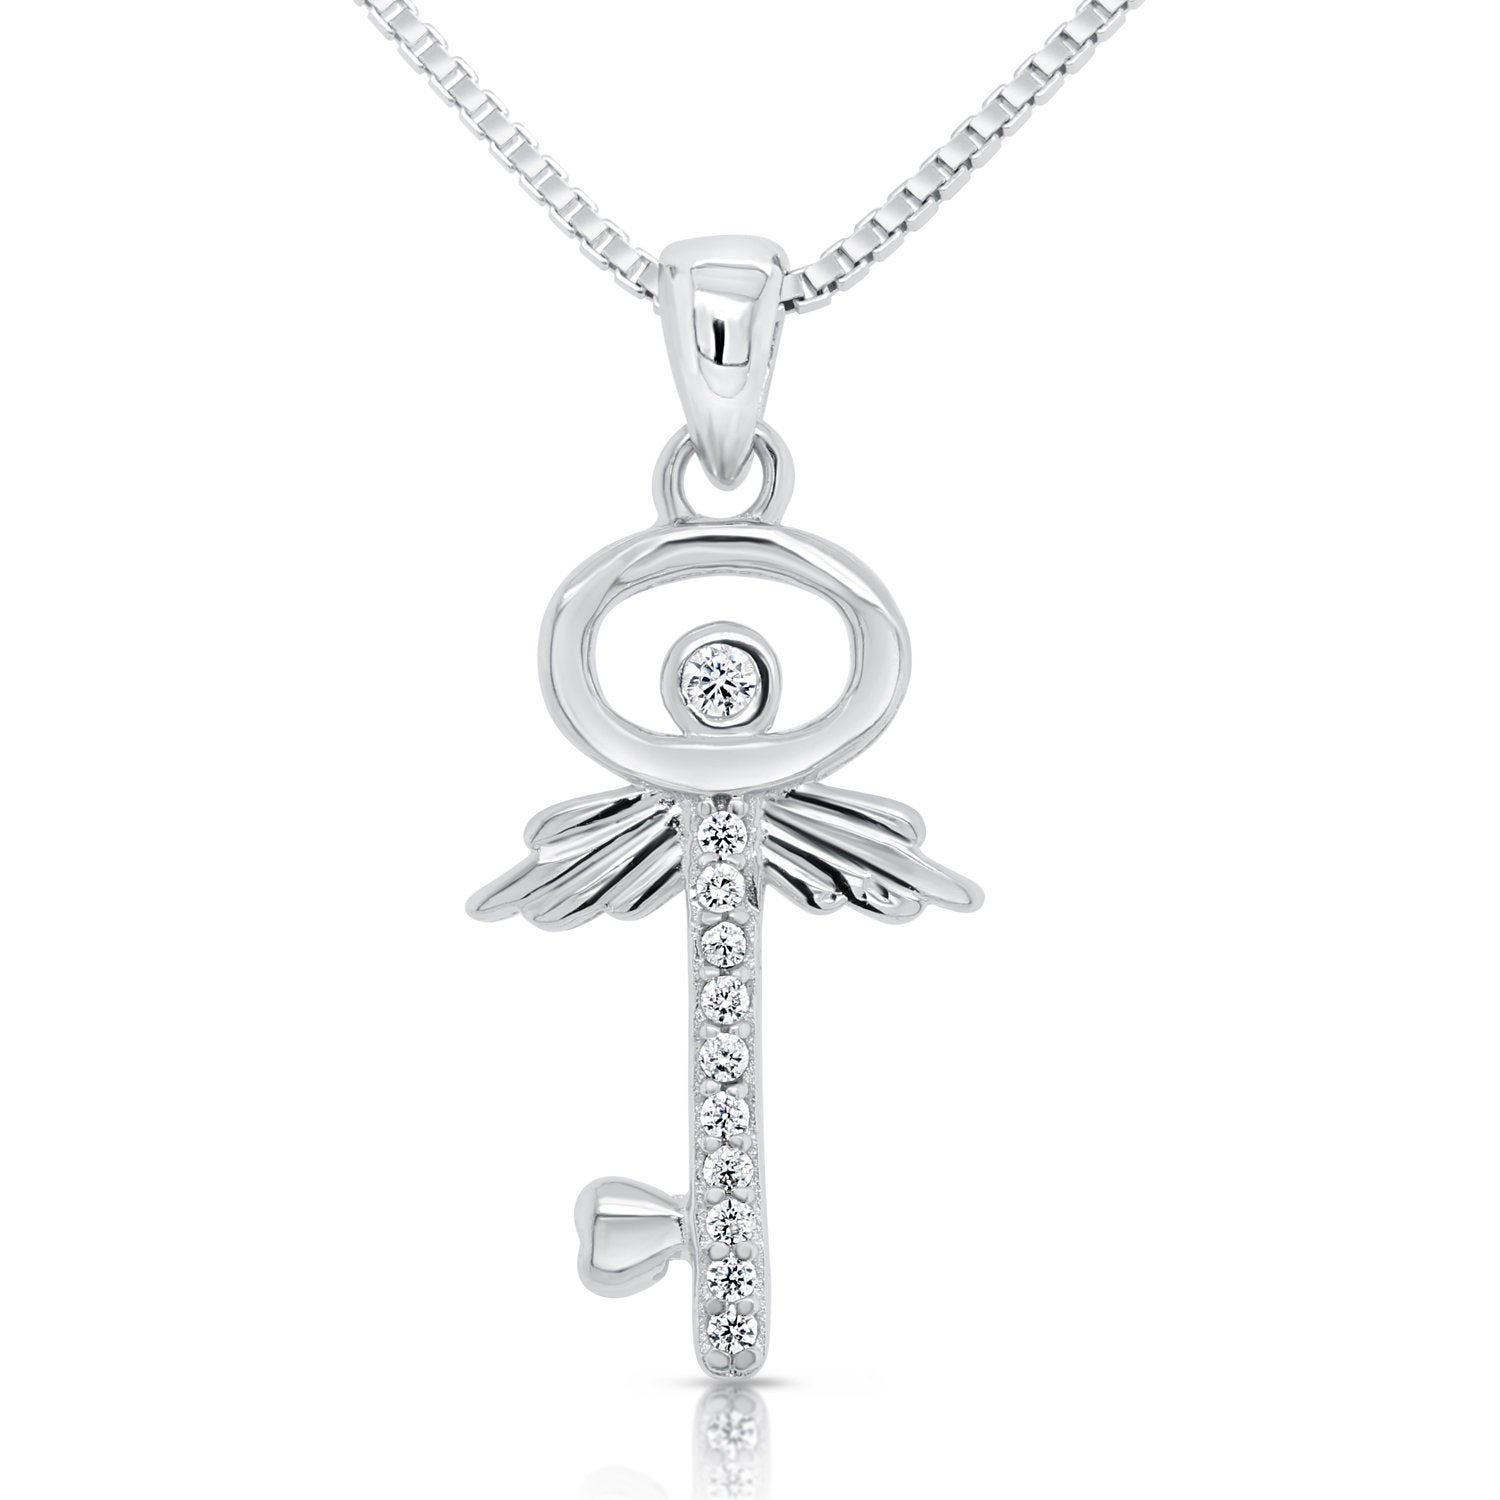 CZ Key Charm Necklace in Sterling Silver